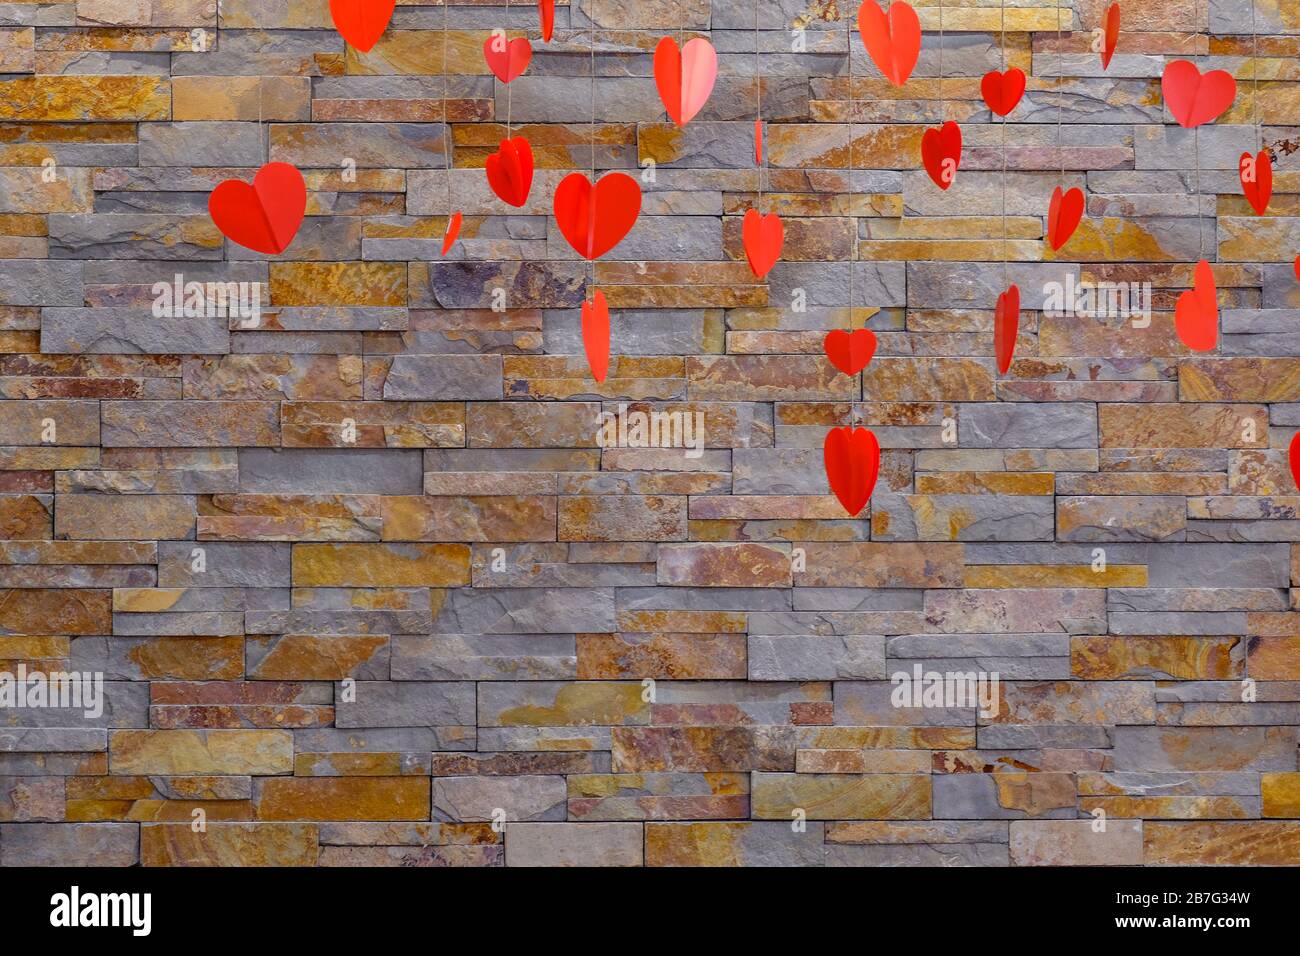 Artificial stone background on the wall. Hanging red hearts for Valentine's Day. Homemade Paper Products. Stock Photo